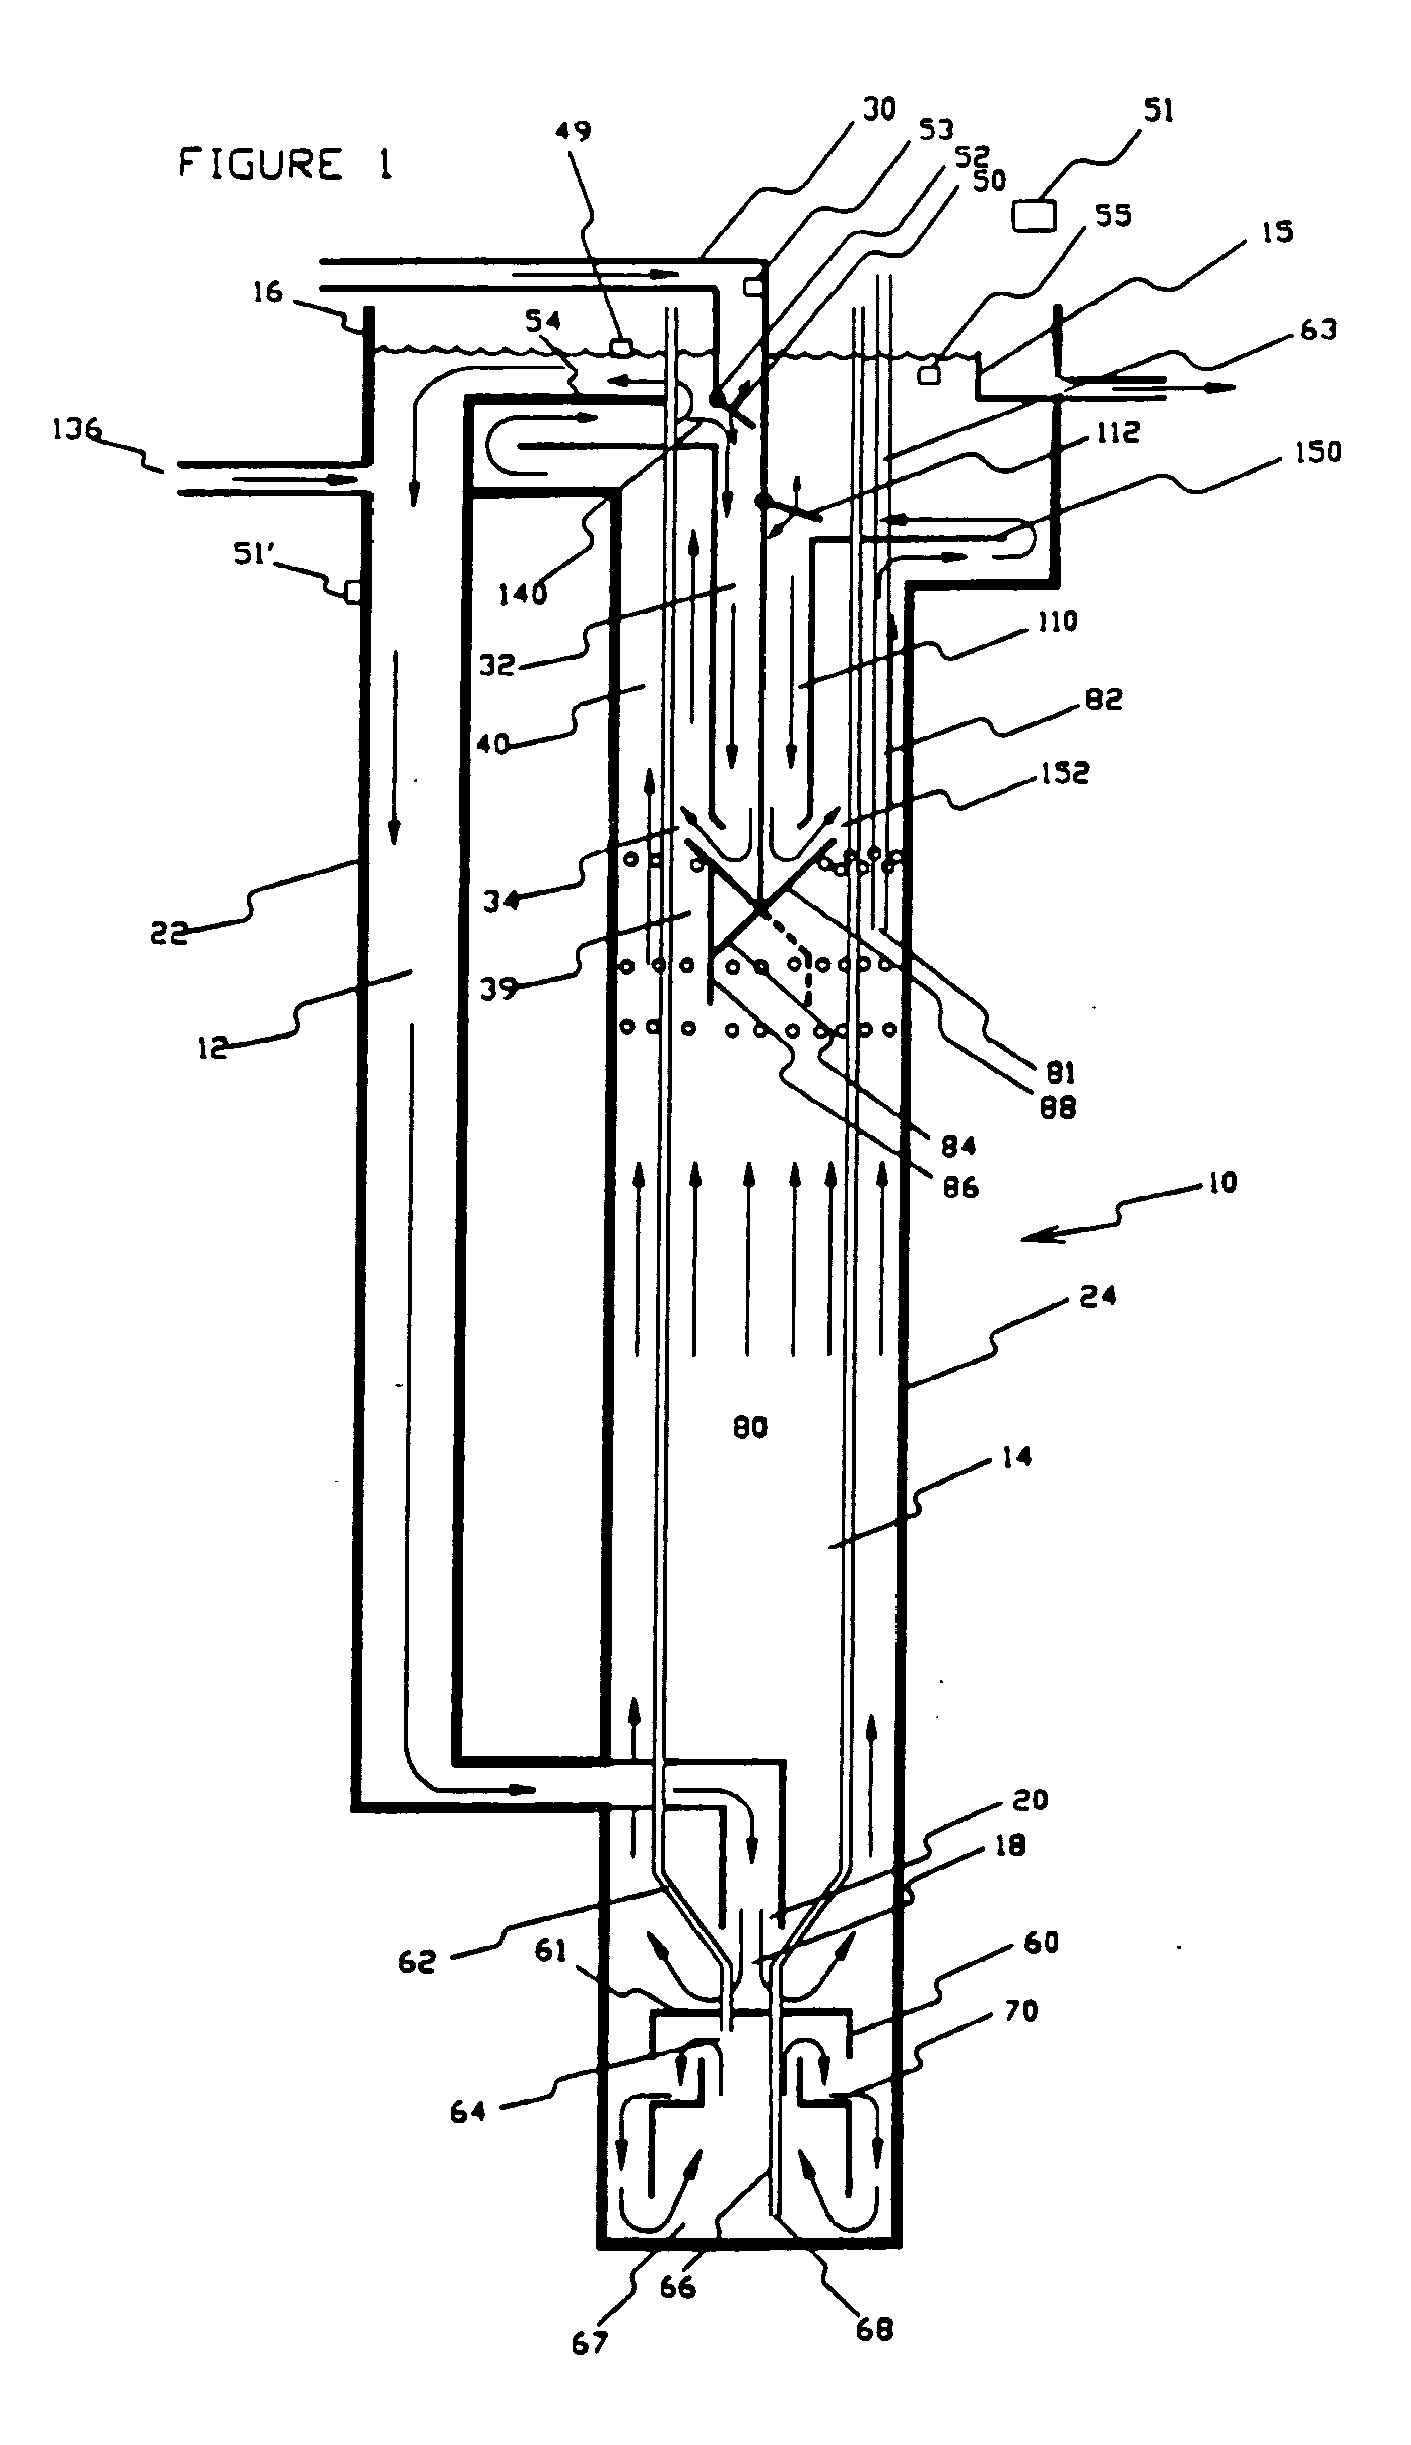 Method and apparatus providing improved throughput and operating life of submerged membranes